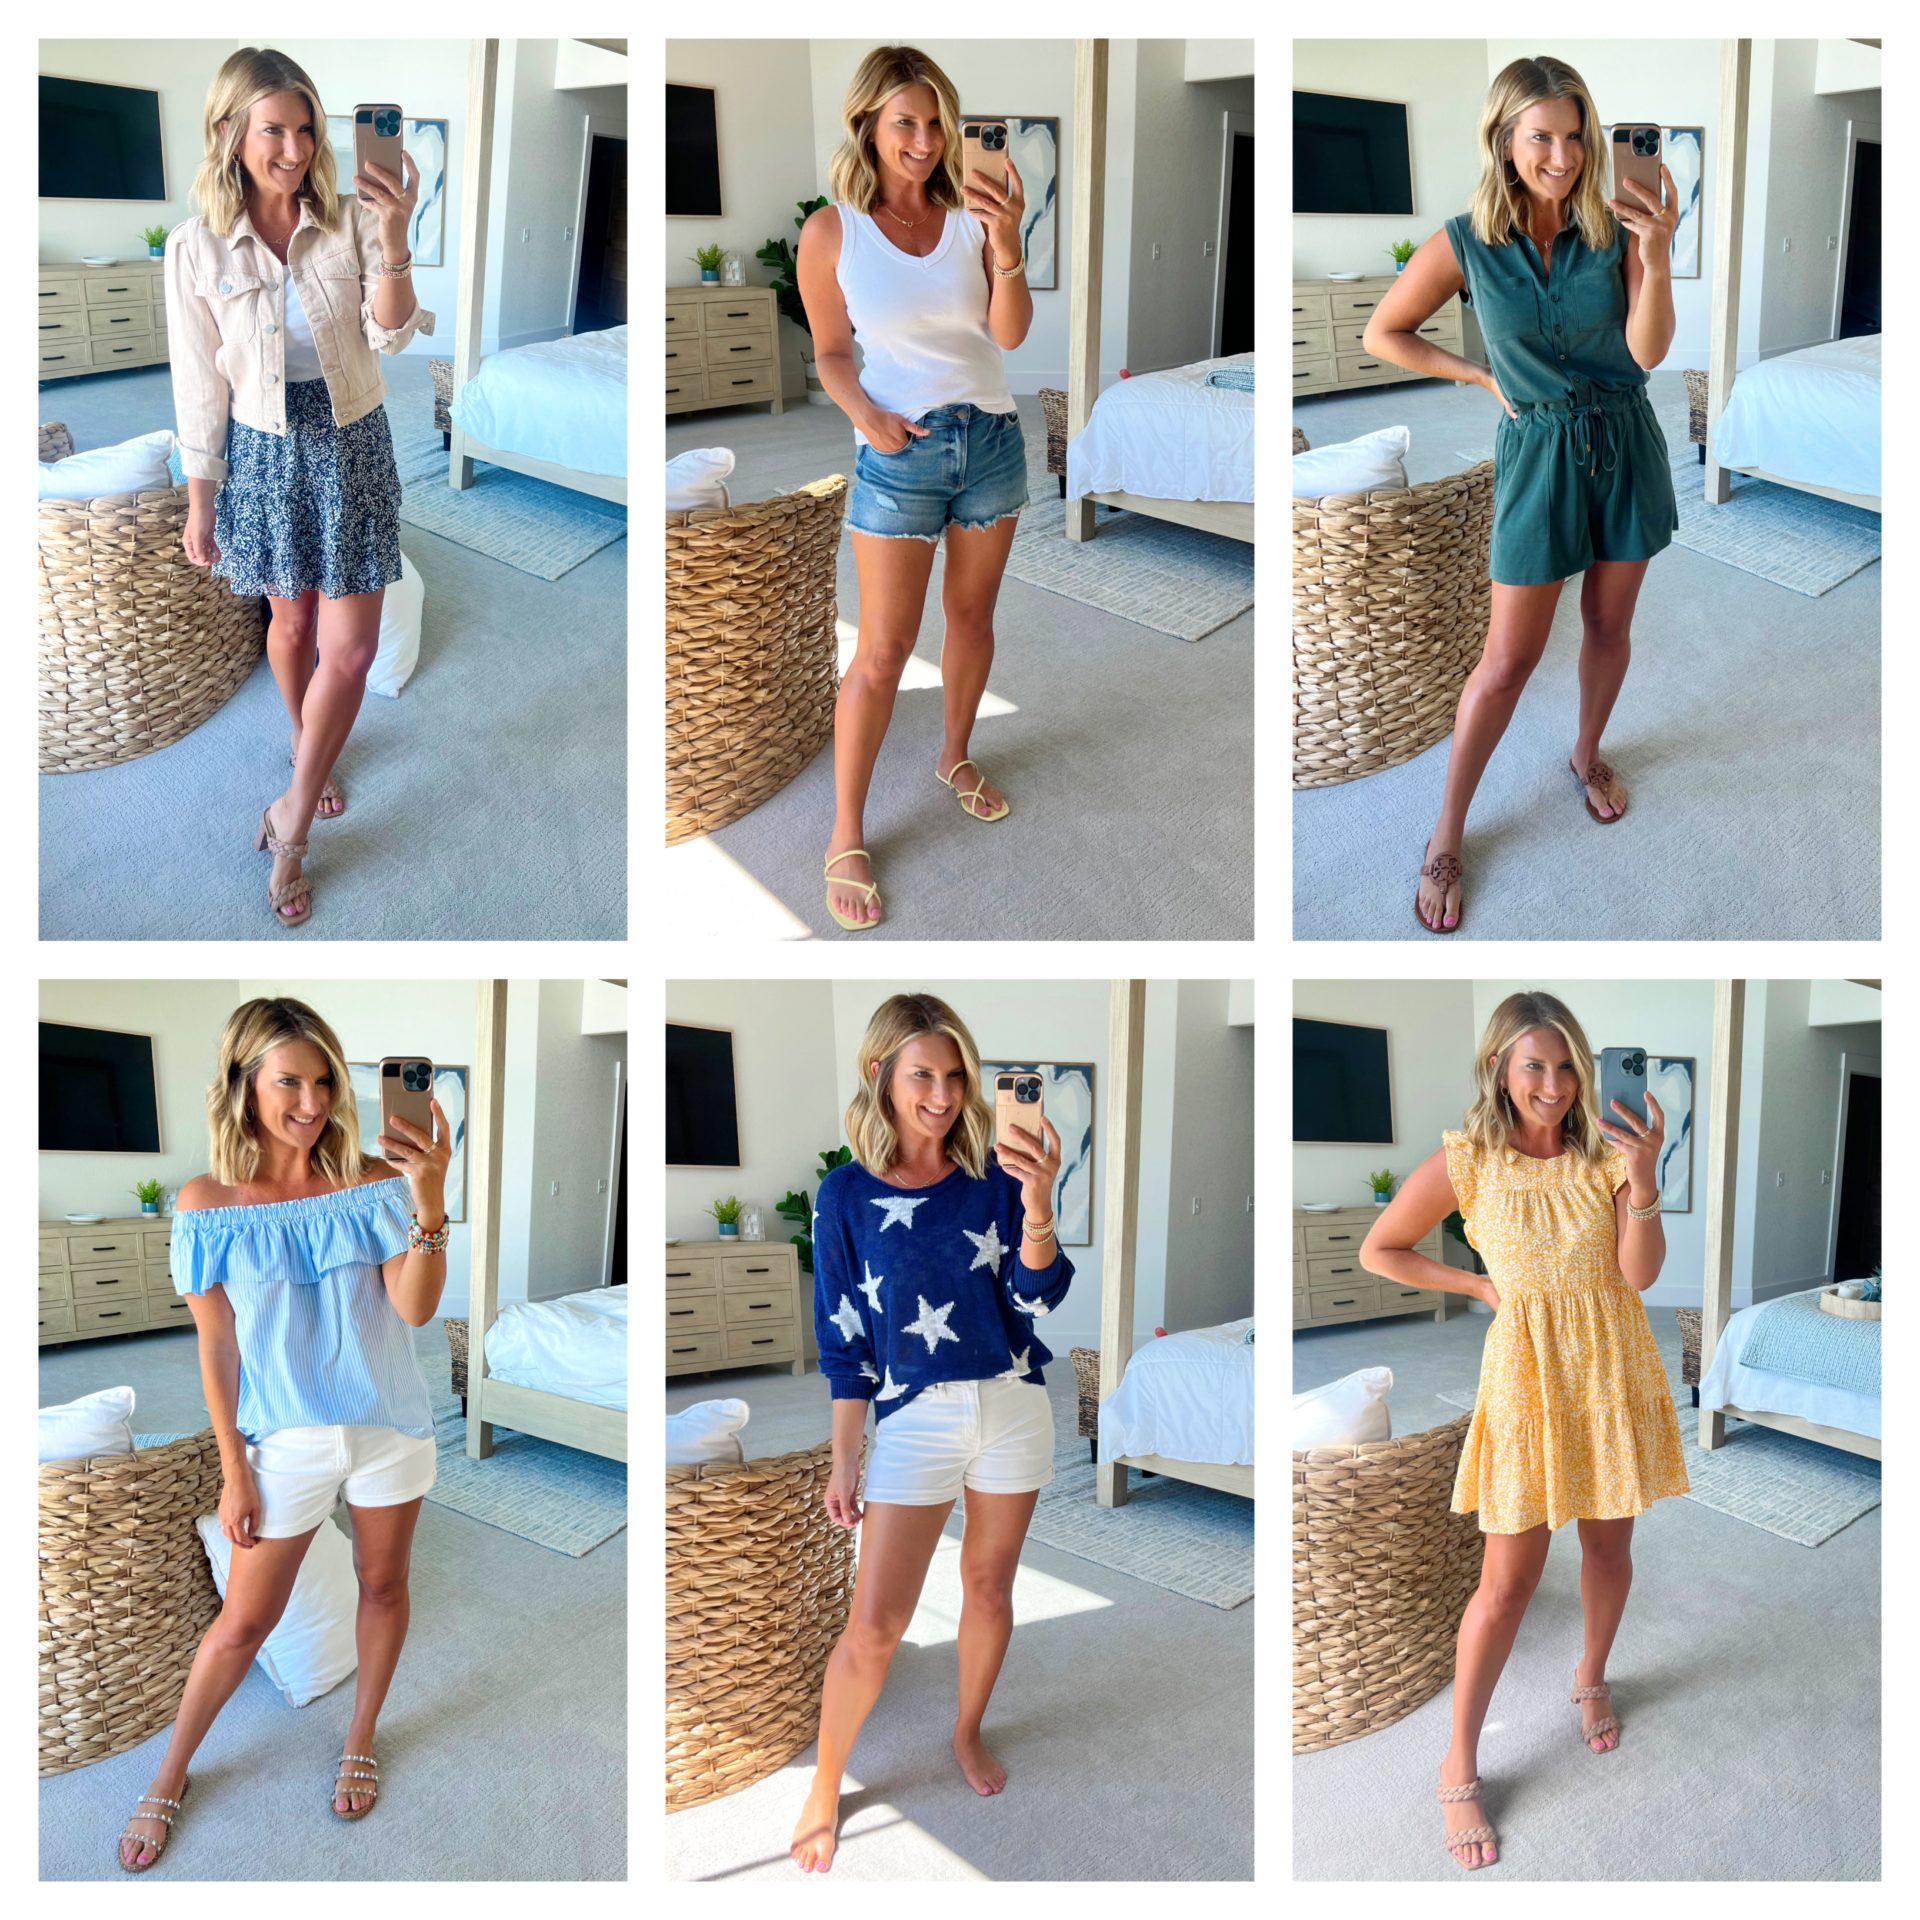 Summer Outfit Ideas & Inspiration